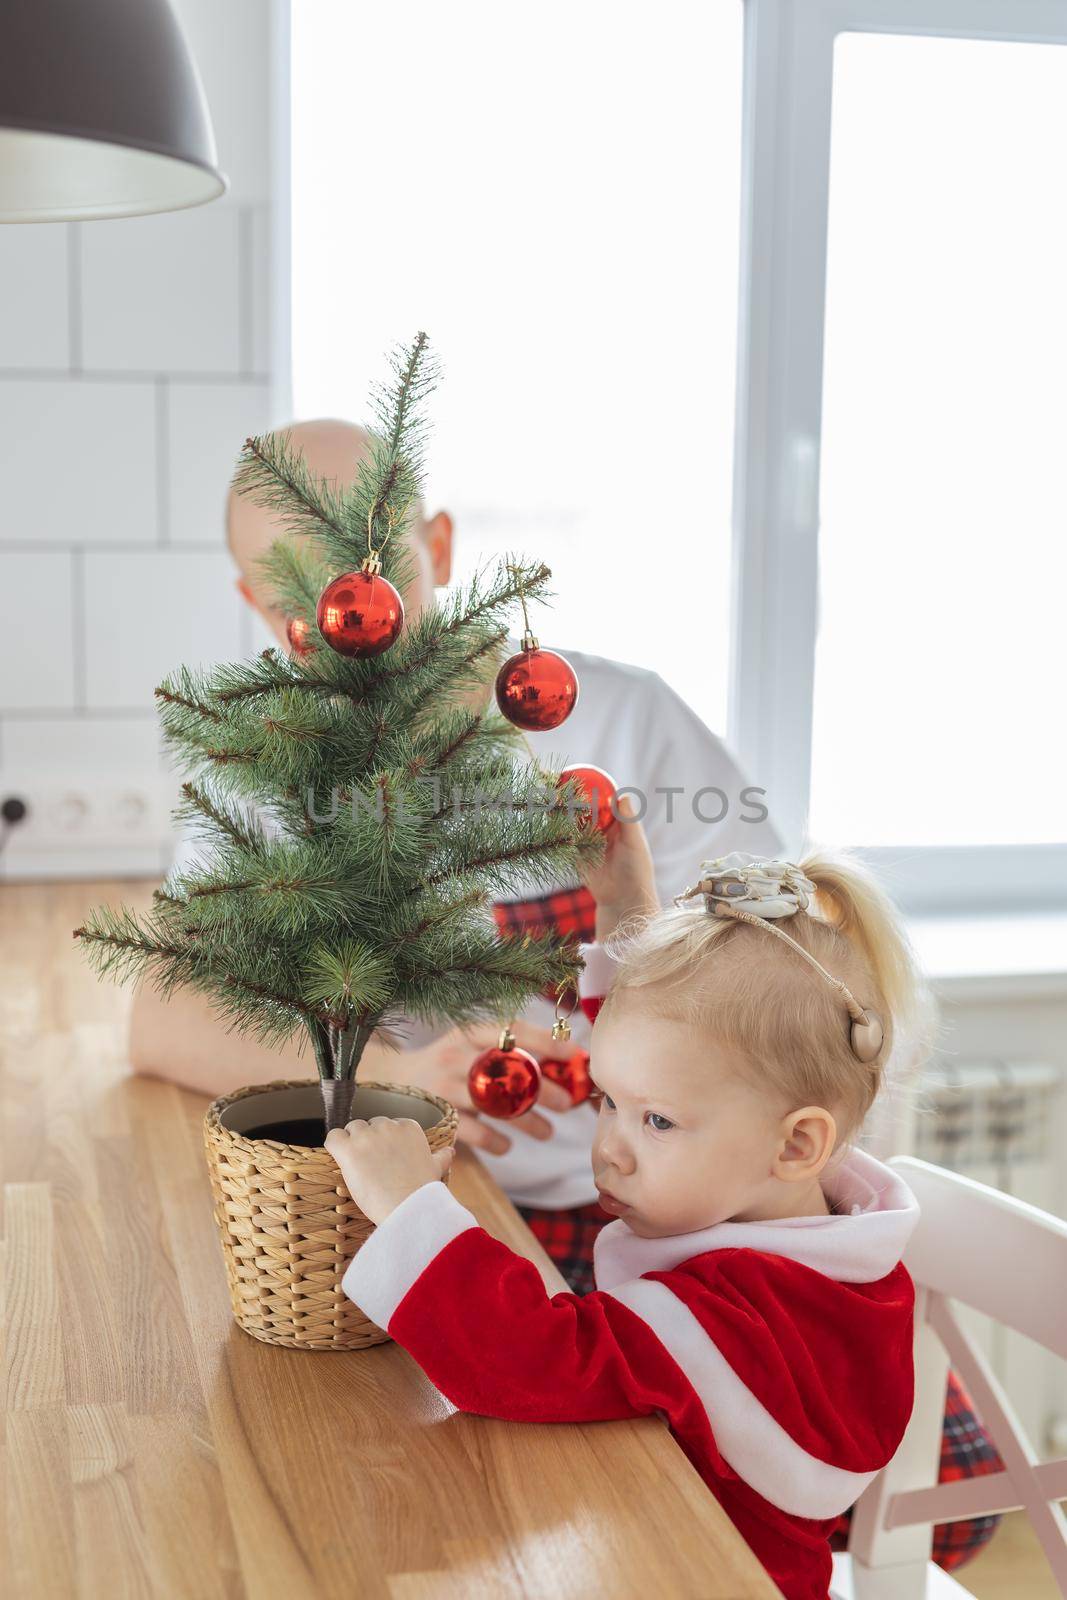 Child with cochlear implant hearing aid having fun with father and small christmas tree - diversity and deafness treatment and medical innovative technologies by Satura86